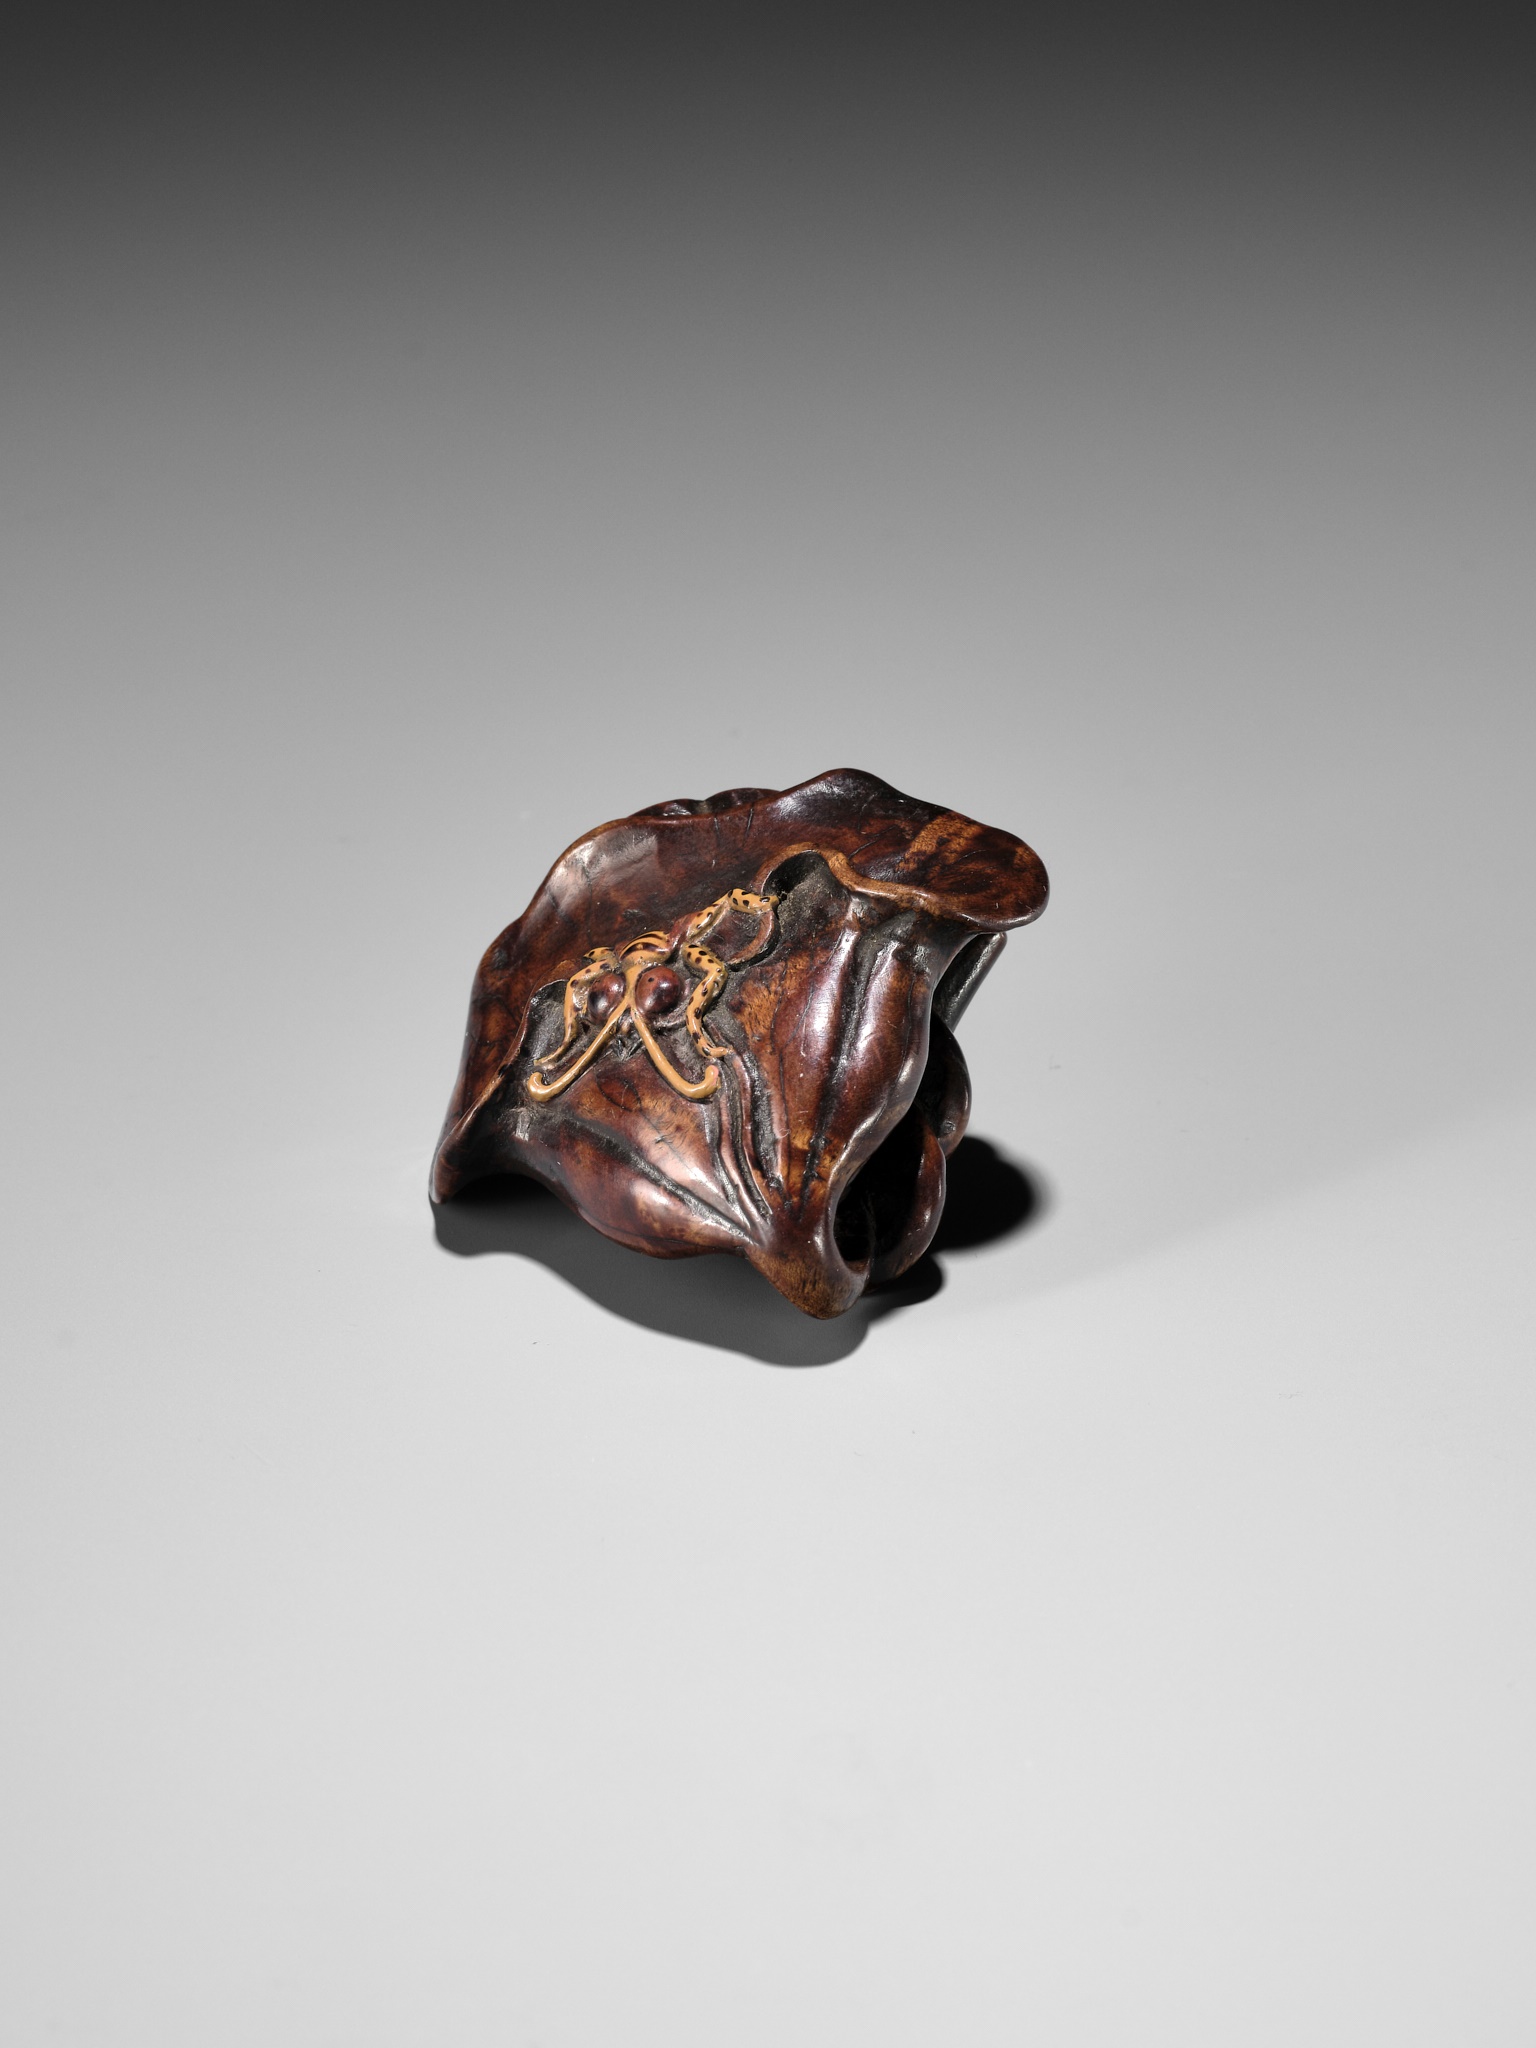 IKKOKUSAI: A RARE TAKAMORIE LACQUERED WOOD NETSUKE OF A WASP AND LOTUS - Image 5 of 7